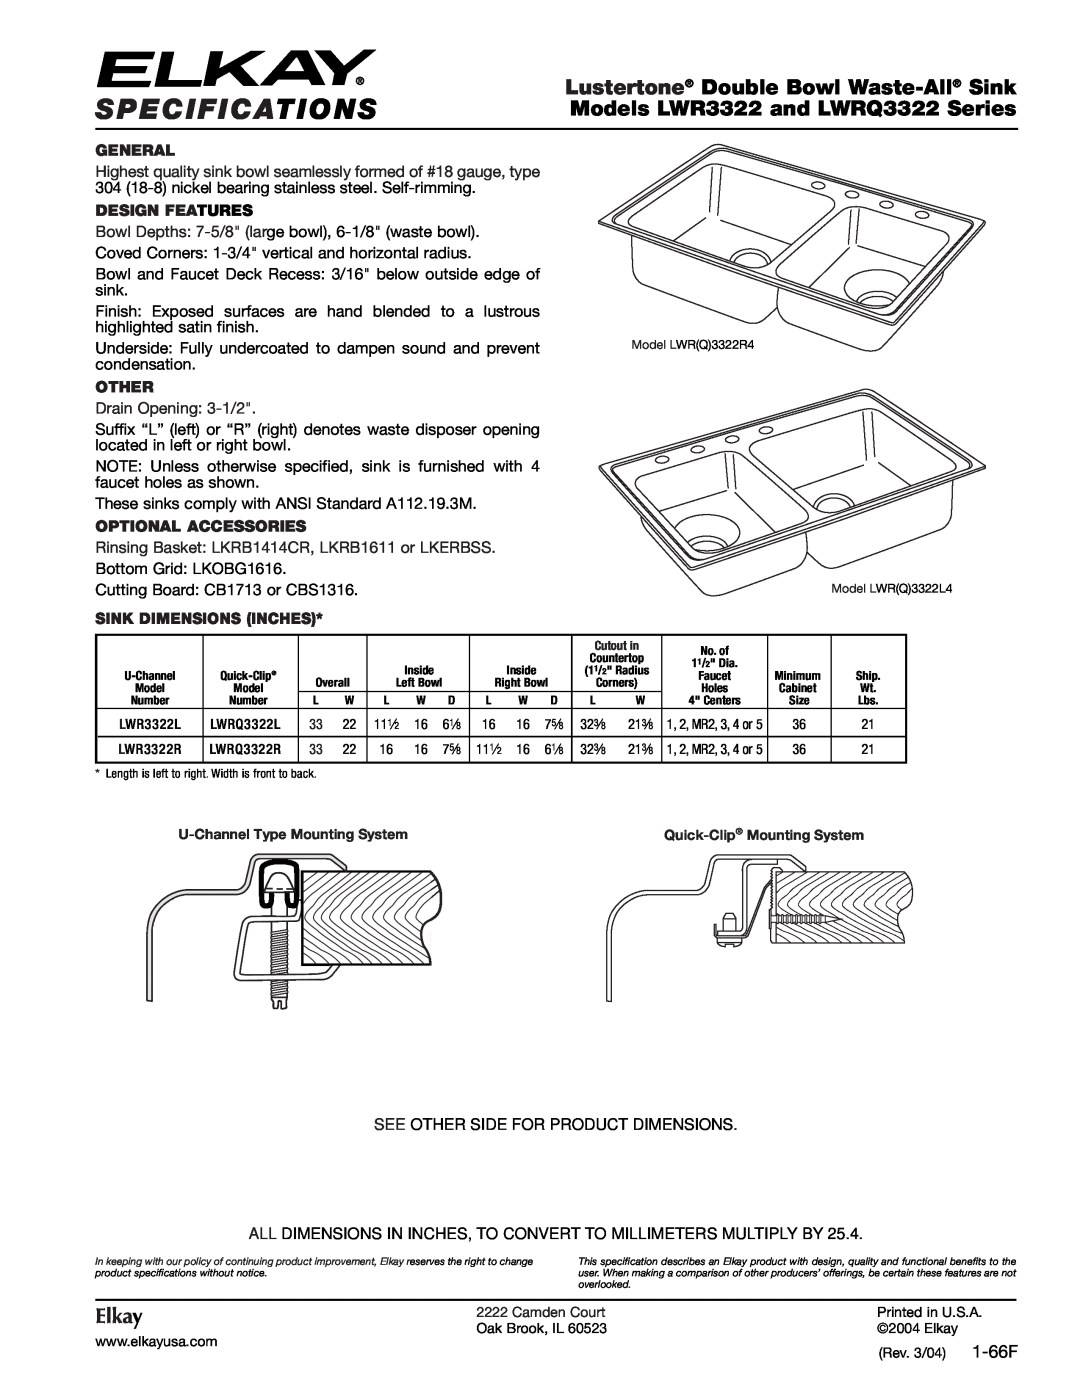 Elkay LWRQ3322L specifications Specifications, Lustertone Double Bowl Waste-All Sink, Models LWR3322 and LWRQ3322 Series 